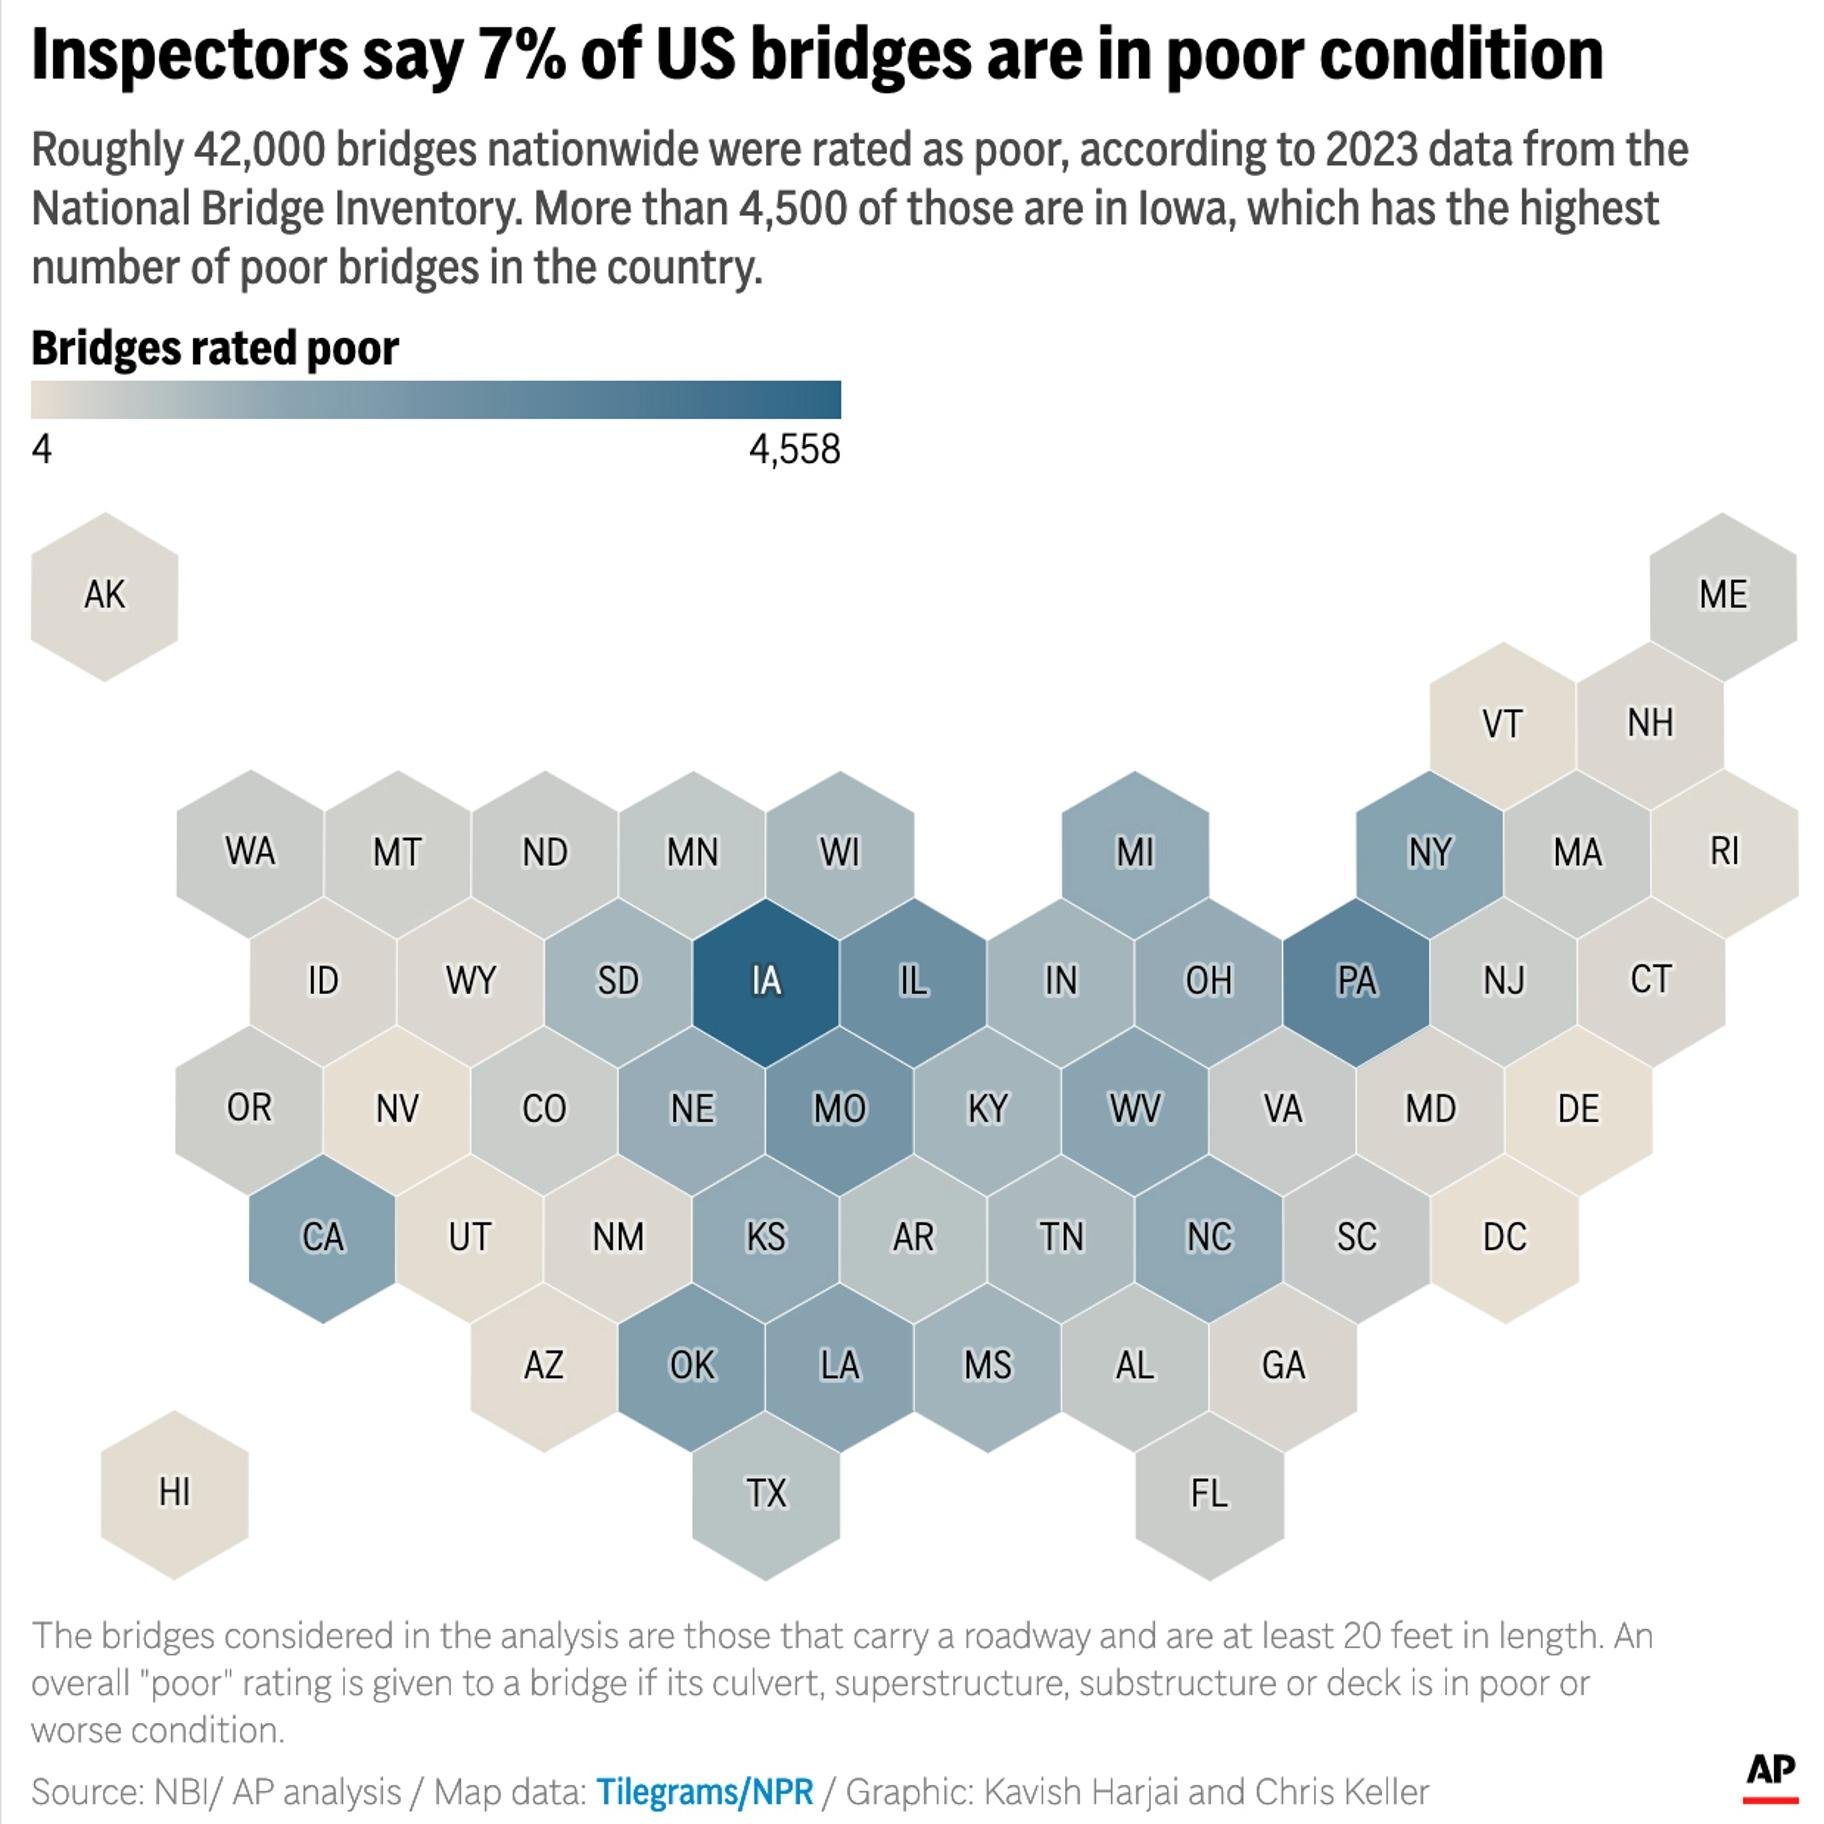 The map above illustrates the number of U.S. bridges rated as in poor condition by state. Thousands of old bridges across the U.S. are awaiting replacement or repairs after inspectors found them in poor condition. (AP Digital Embed)